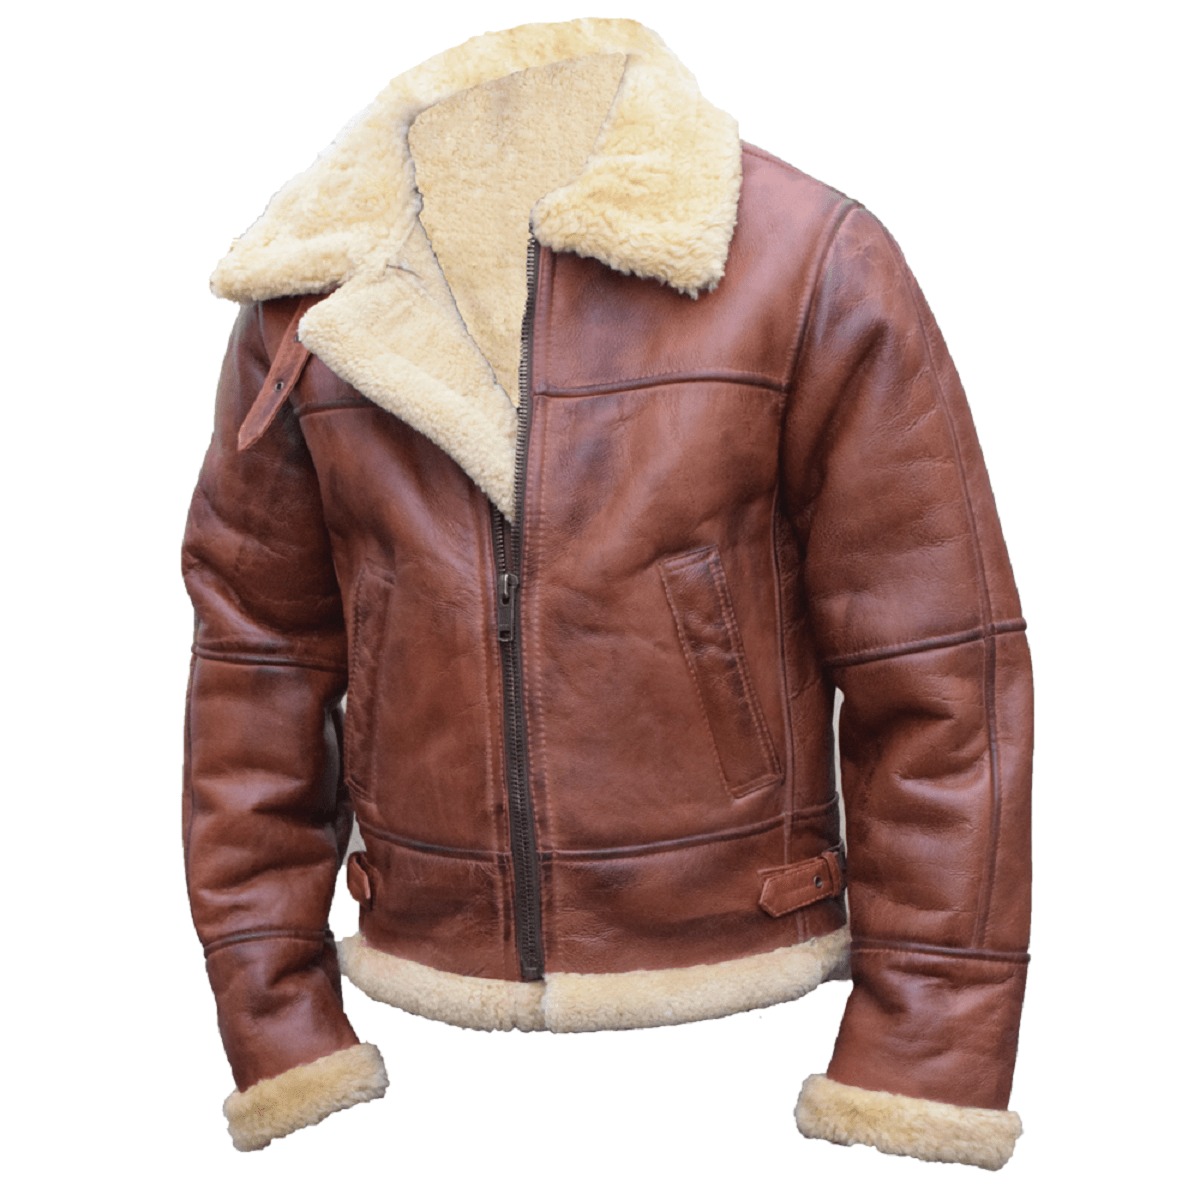 Men's Brown Fur Leather Jacket - New Style In Brown Color